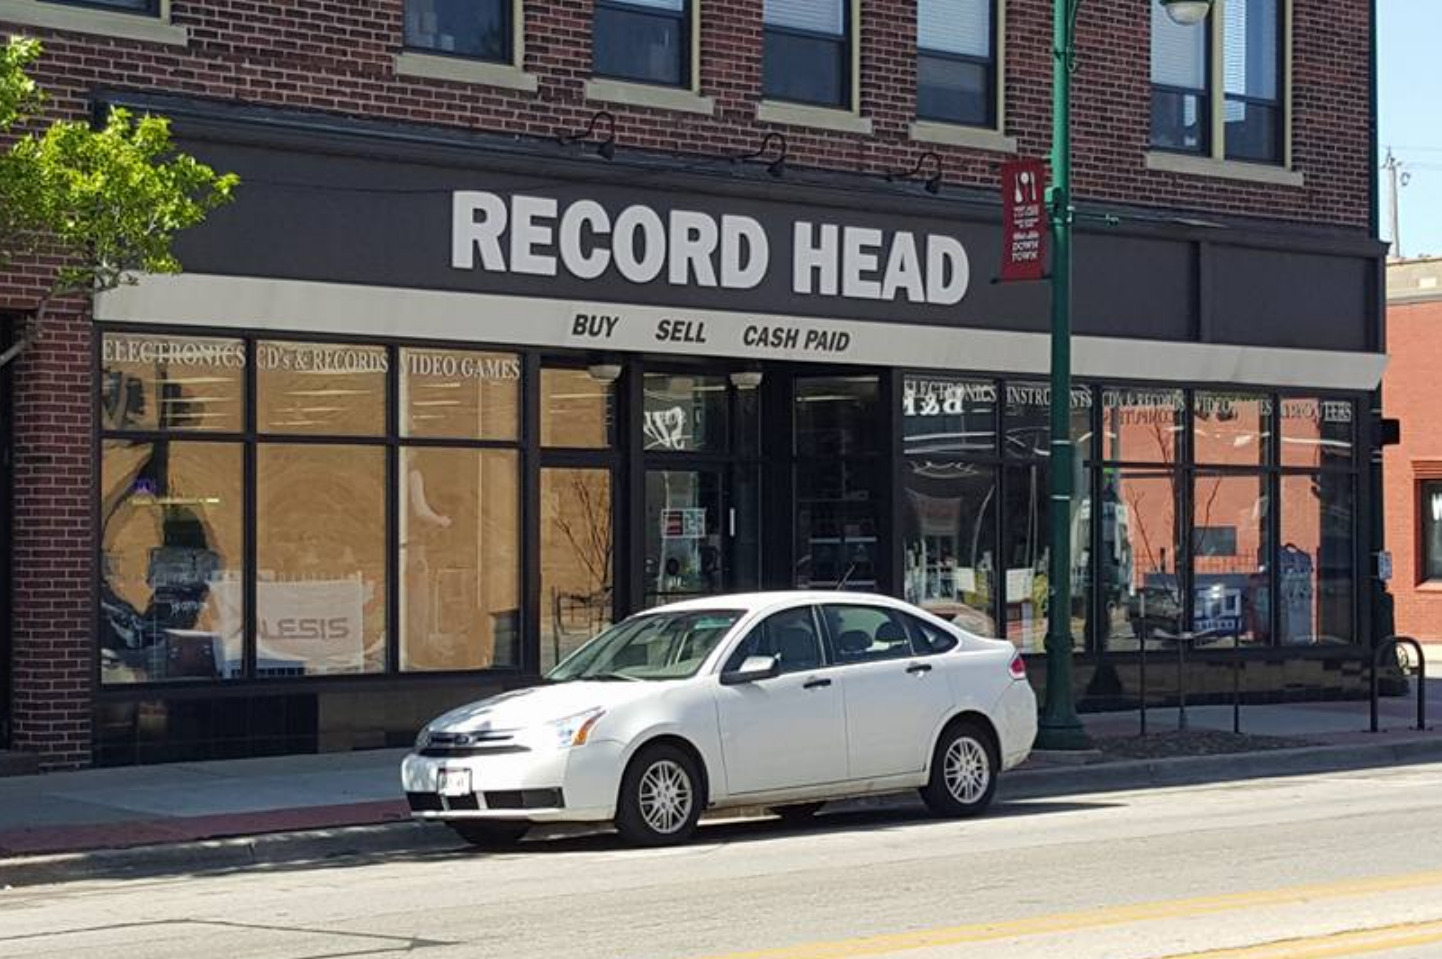 Record Head storefront with a white car parked in front. Storefront awning is white and black with "Record Head" name on the awning.